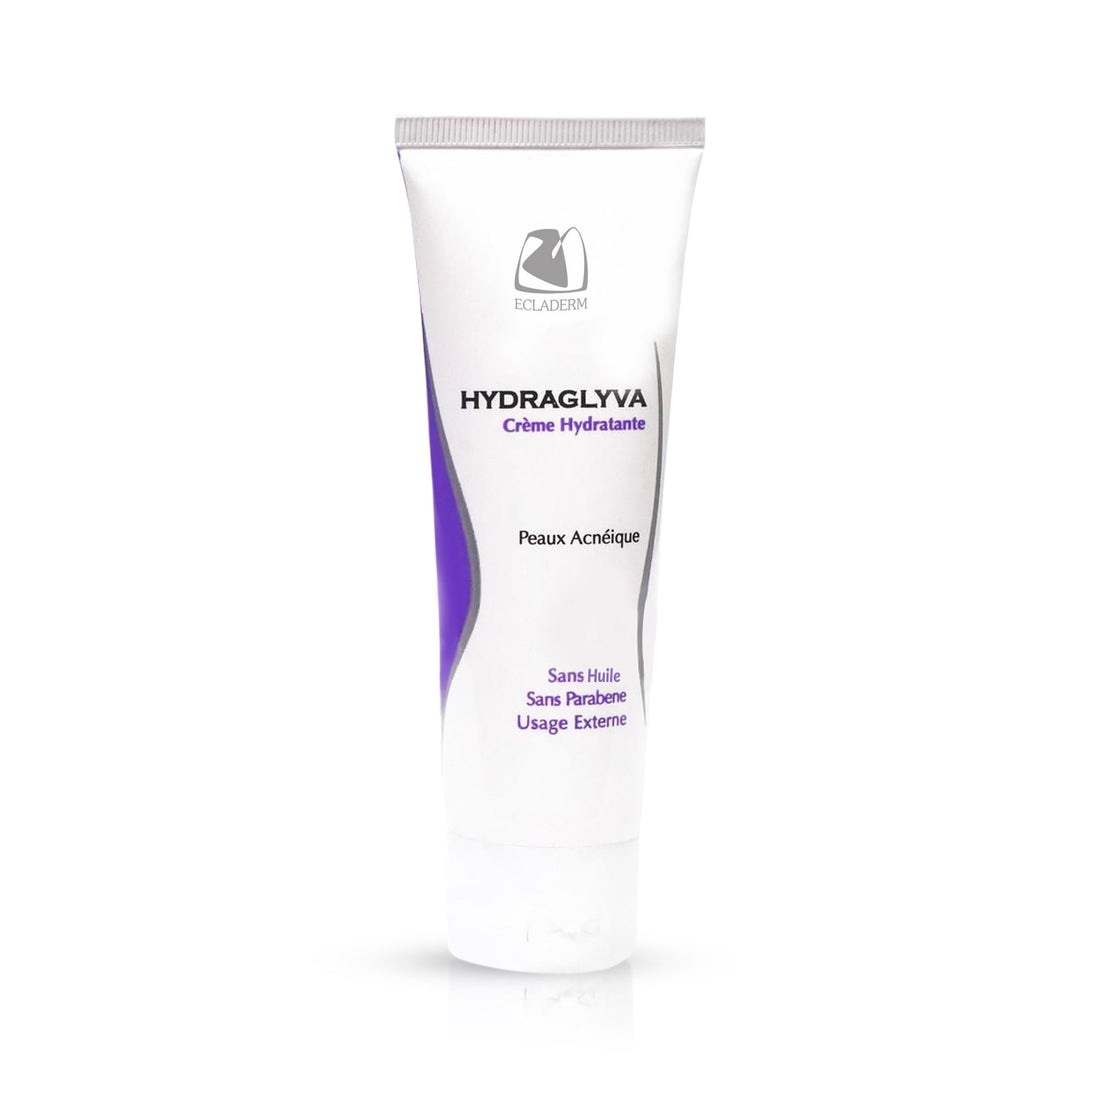 Hydraglyva Hydrating Facial Moisturizer for Oily to Acne-Prone Skin from Ecladerm